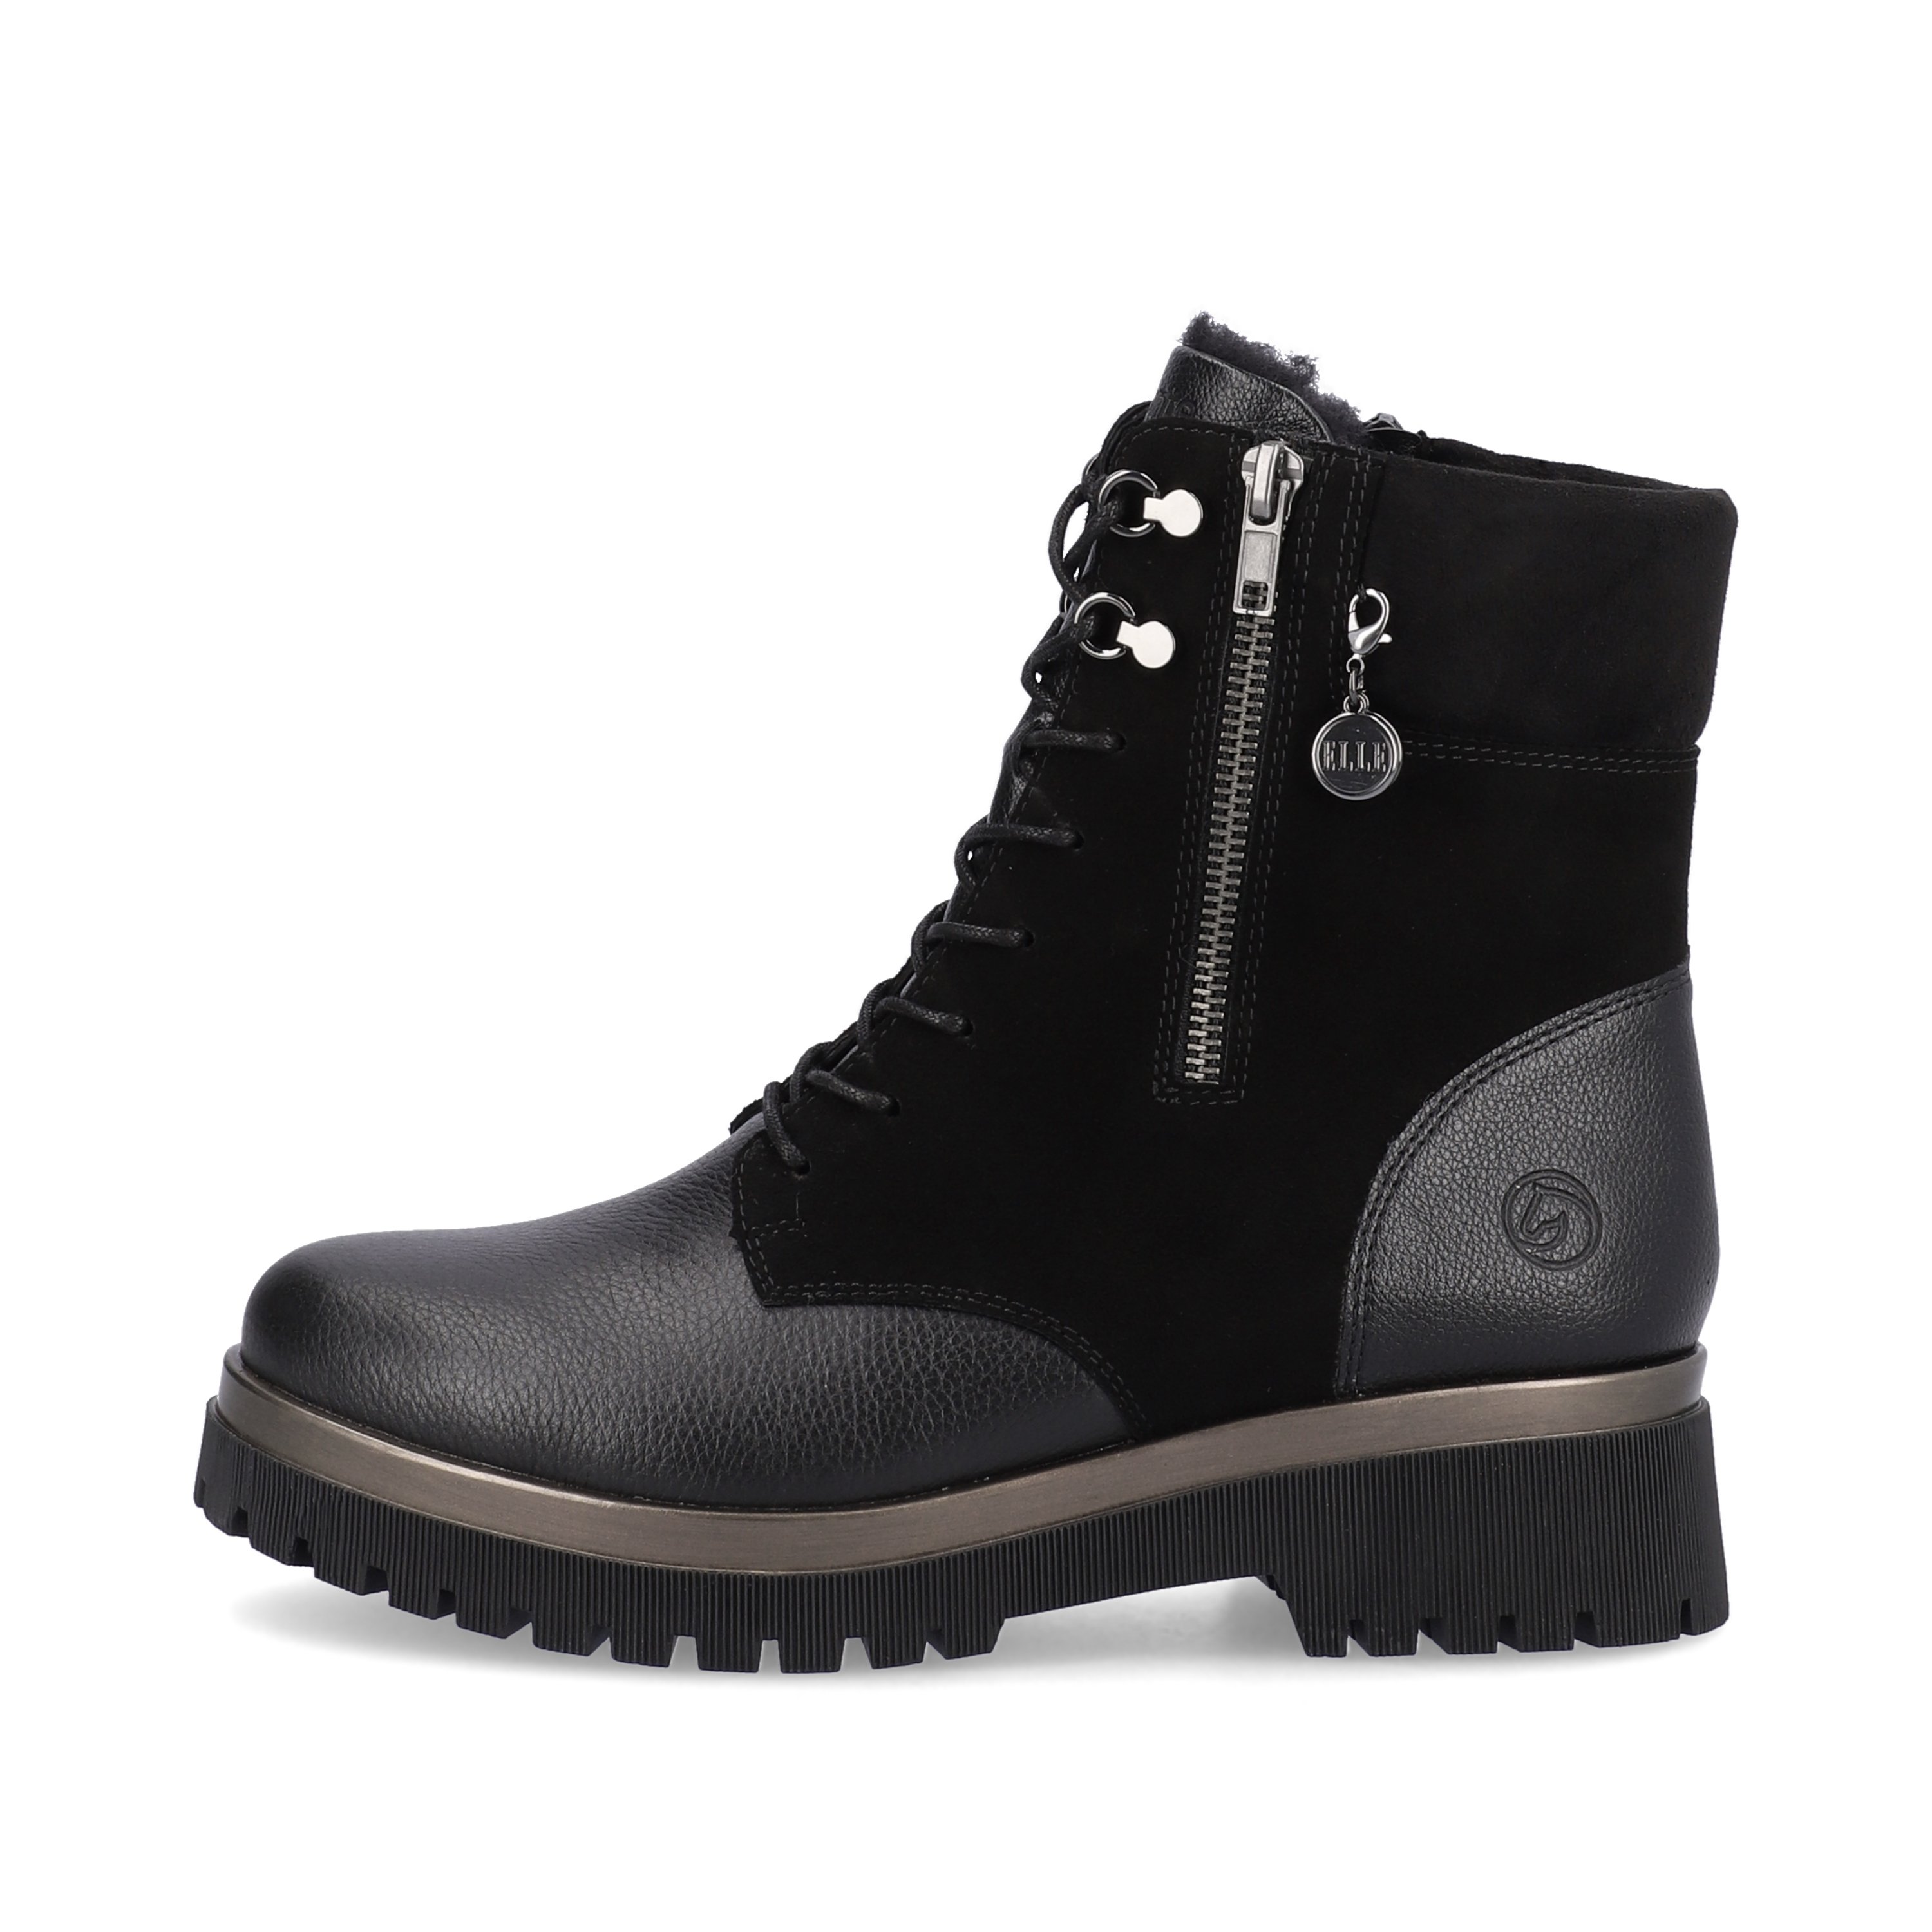 Night black remonte women´s biker boots D1B73-01 with cushioning profile sole. The outside of the shoe